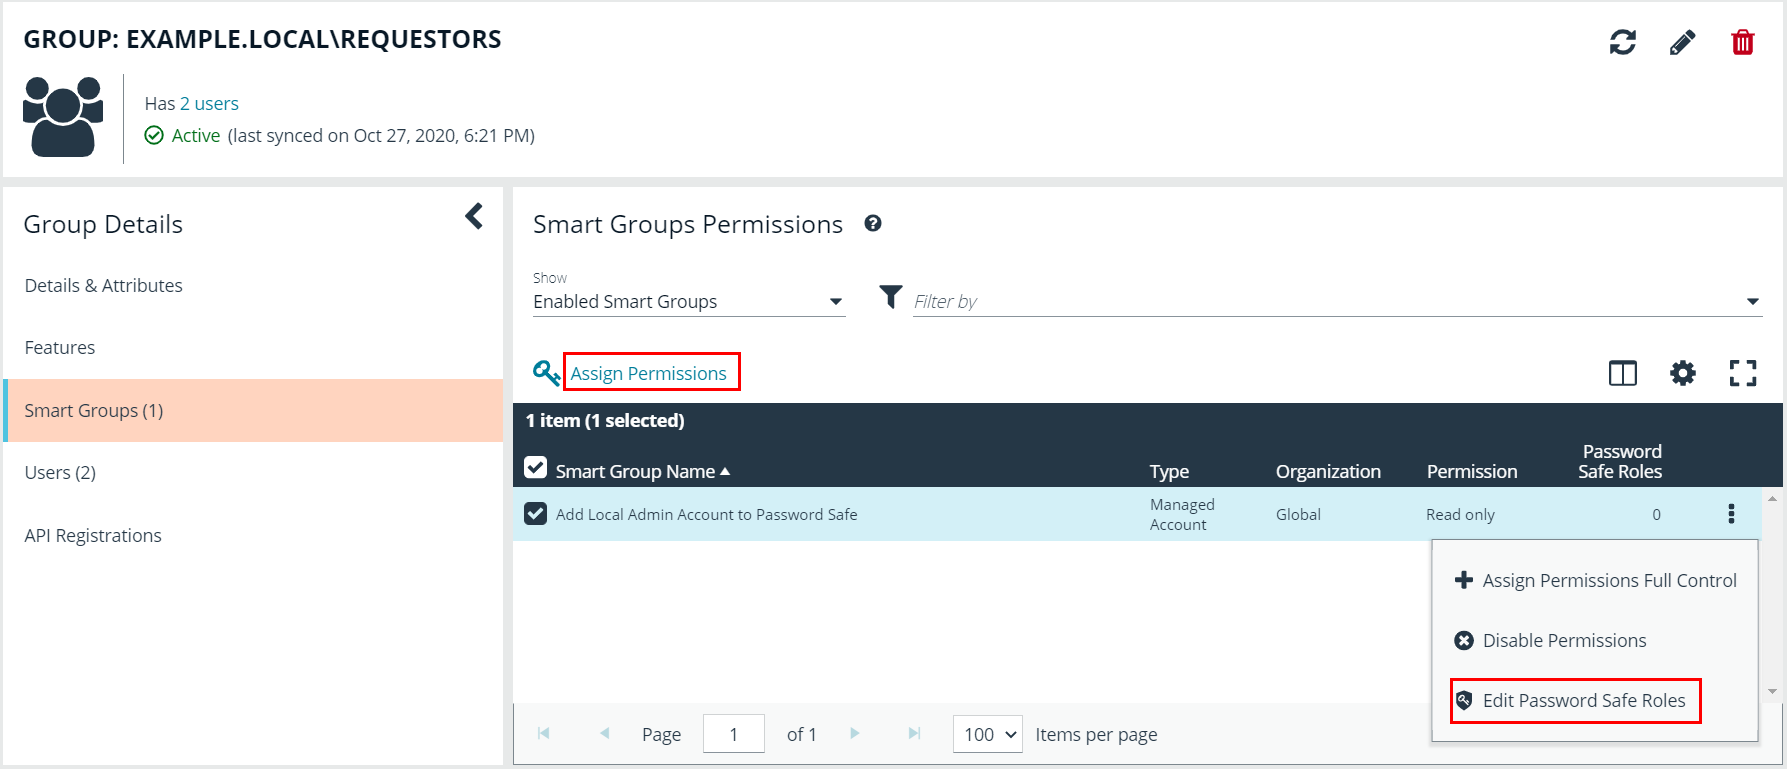 Assign Permissions and Password Safe Roles to User Group Using a Smart Group